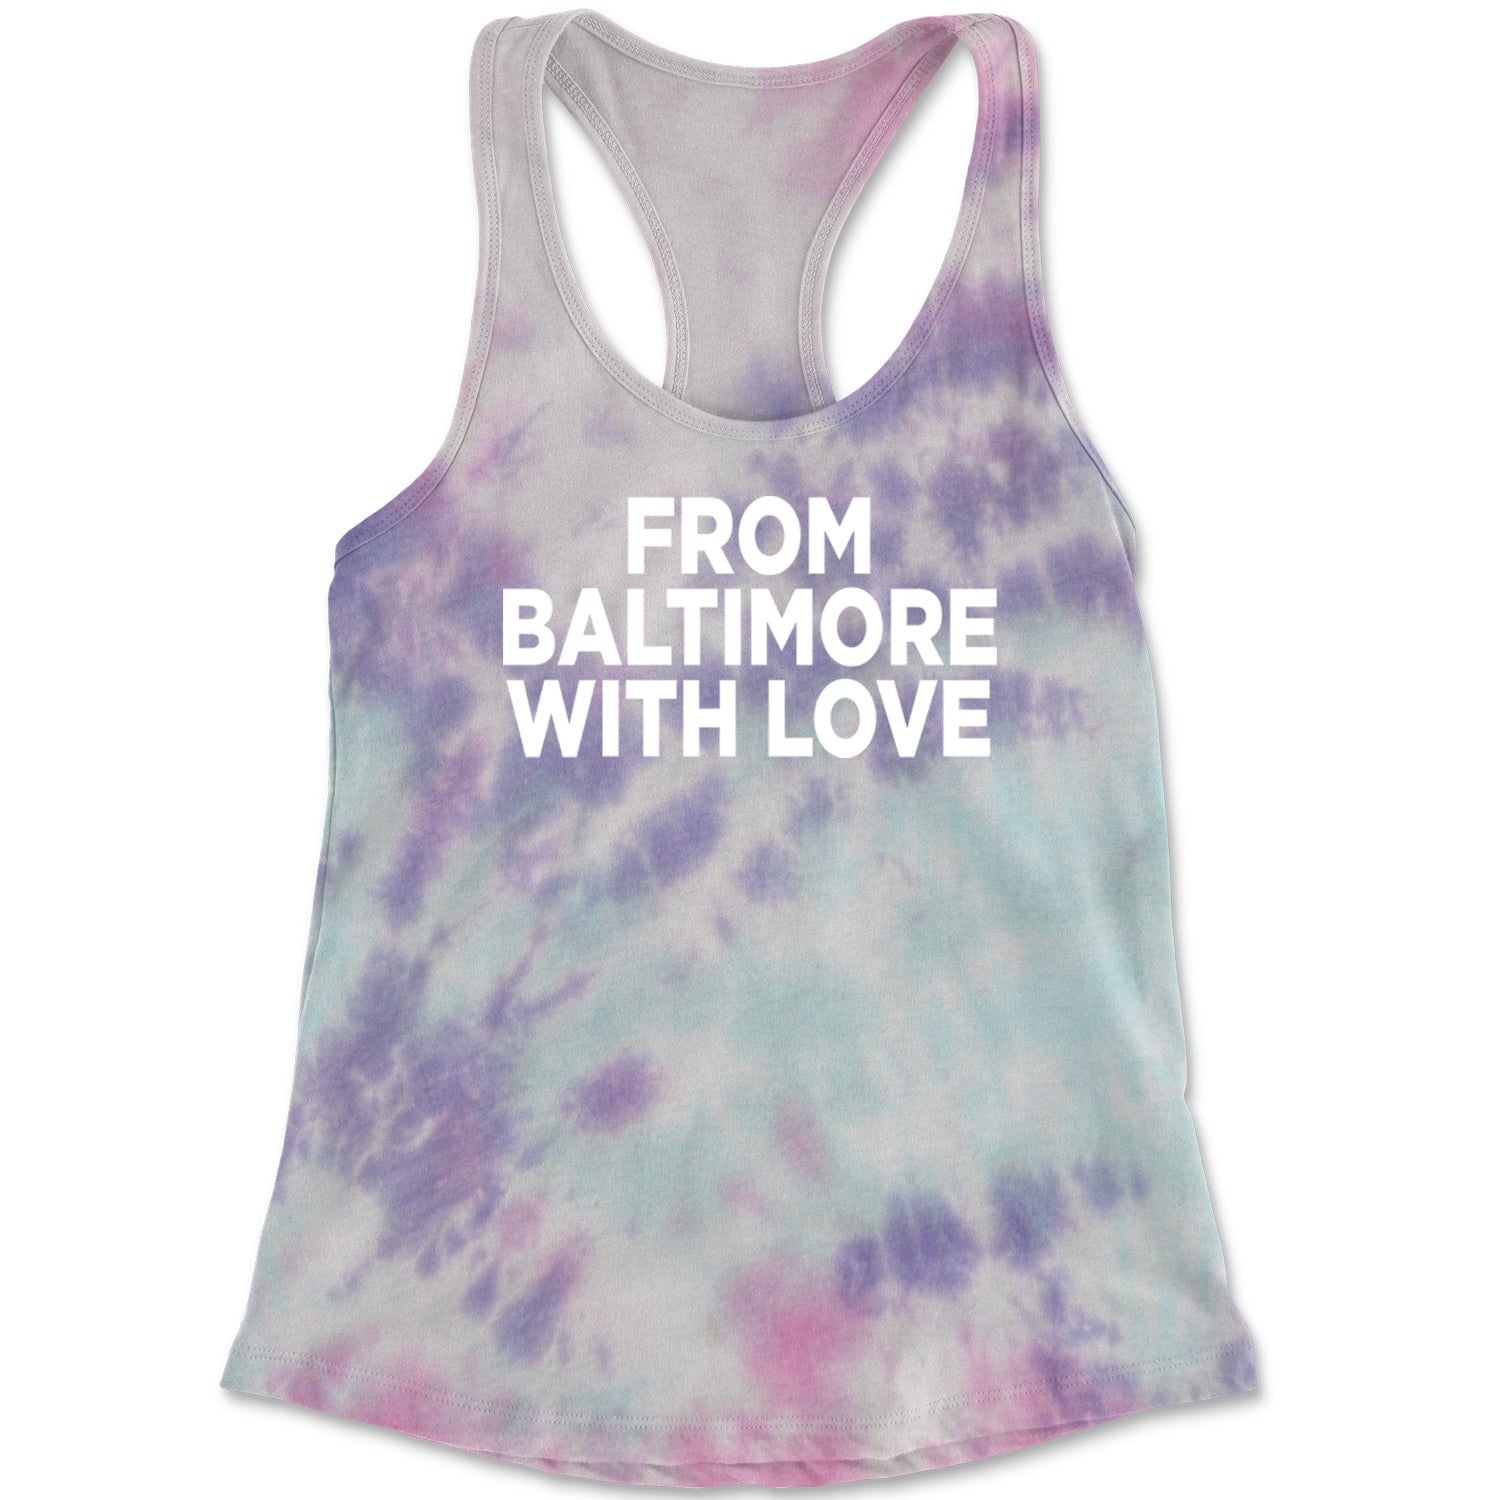 From Baltimore With Love Racerback Tank Top for Women